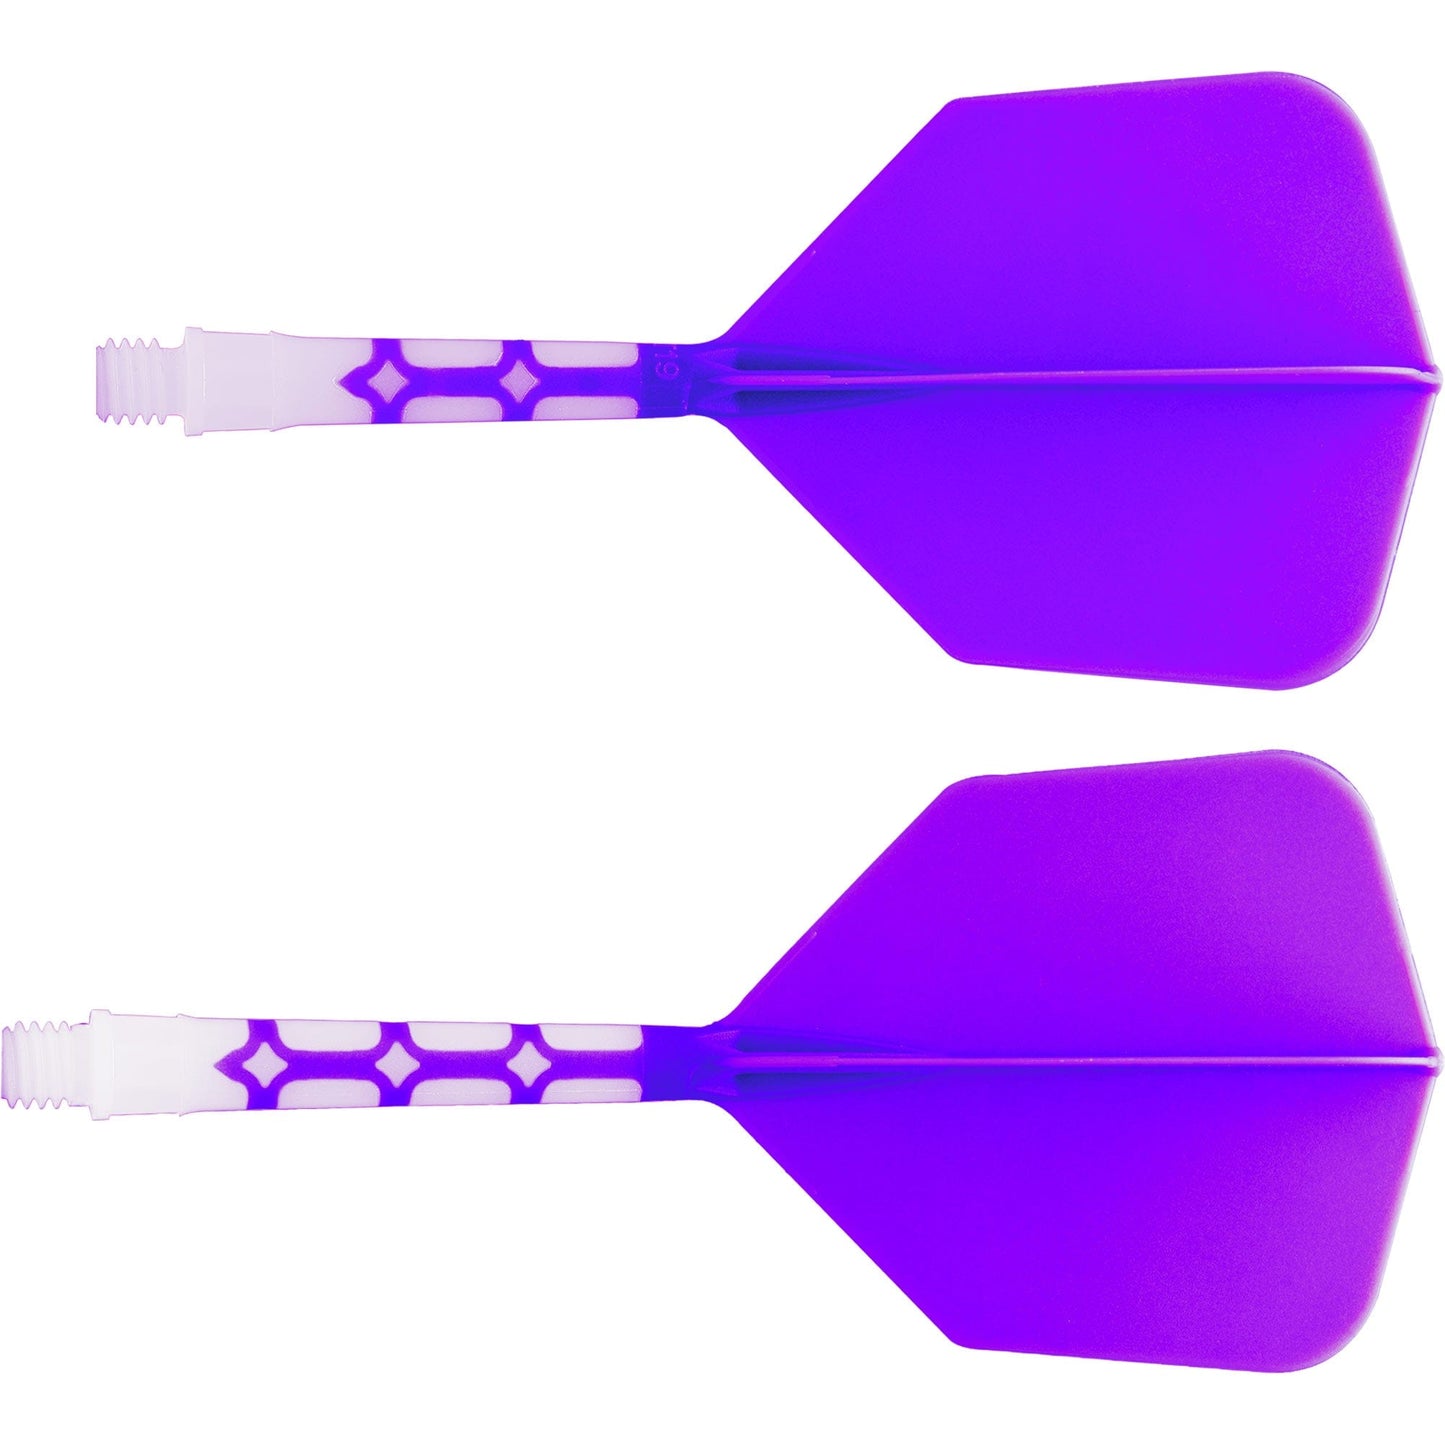 Cuesoul Rost T19 Integrated Dart Shaft and Flights - Big Wing - White with Purple Flight